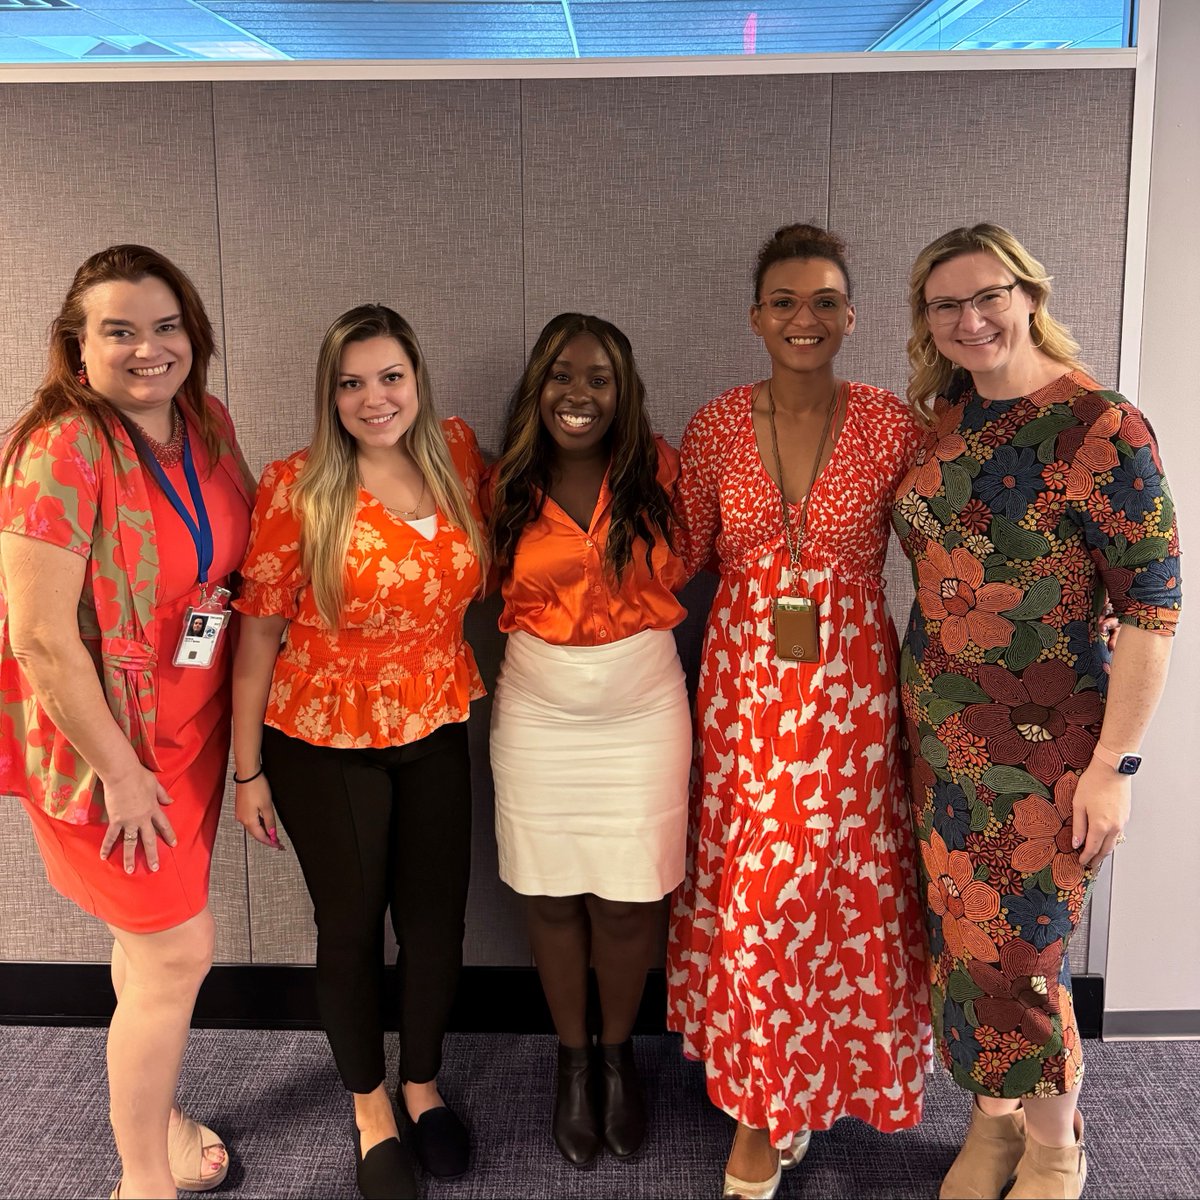 Members of FHWA's Human Resources Office are wearing orange today in support of #WorkZone safety. #Orange4Safety #OrangeForSafety #NWZAW #NWZAW2024 #SafeWorkZonesForAll #SafeWorkZones